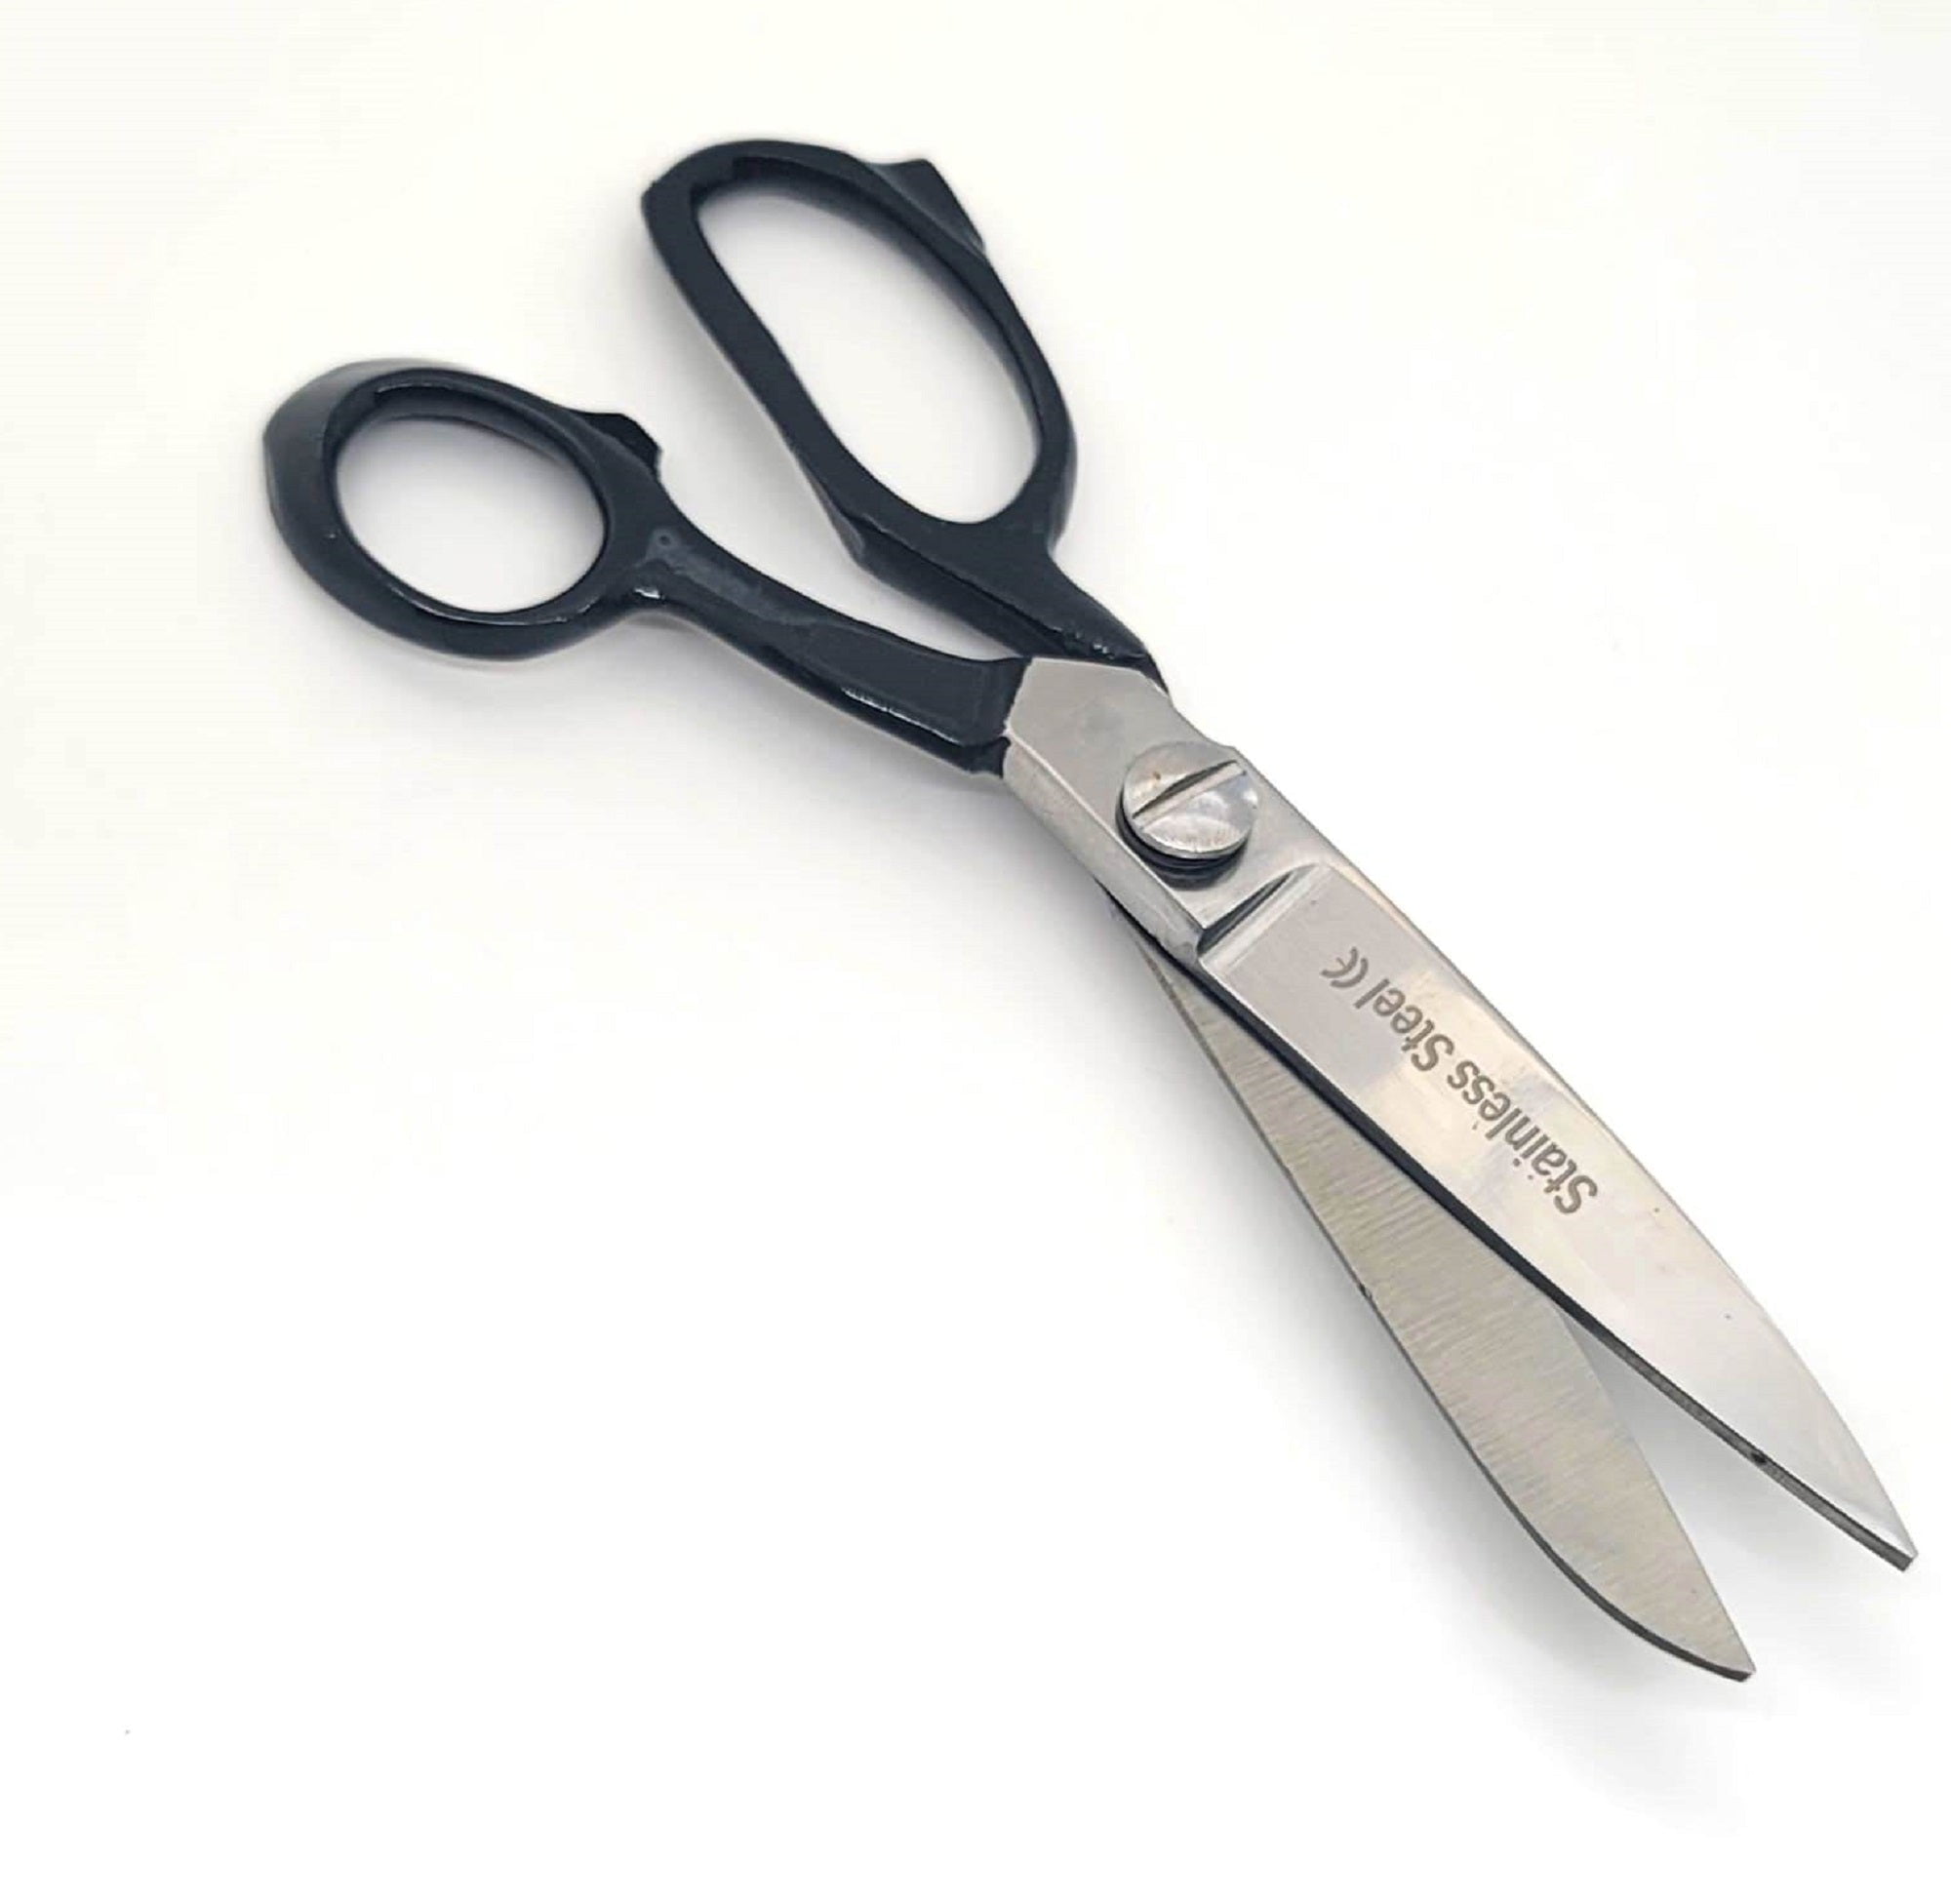 12 Brass Tailor Scissors – The Store at MAD